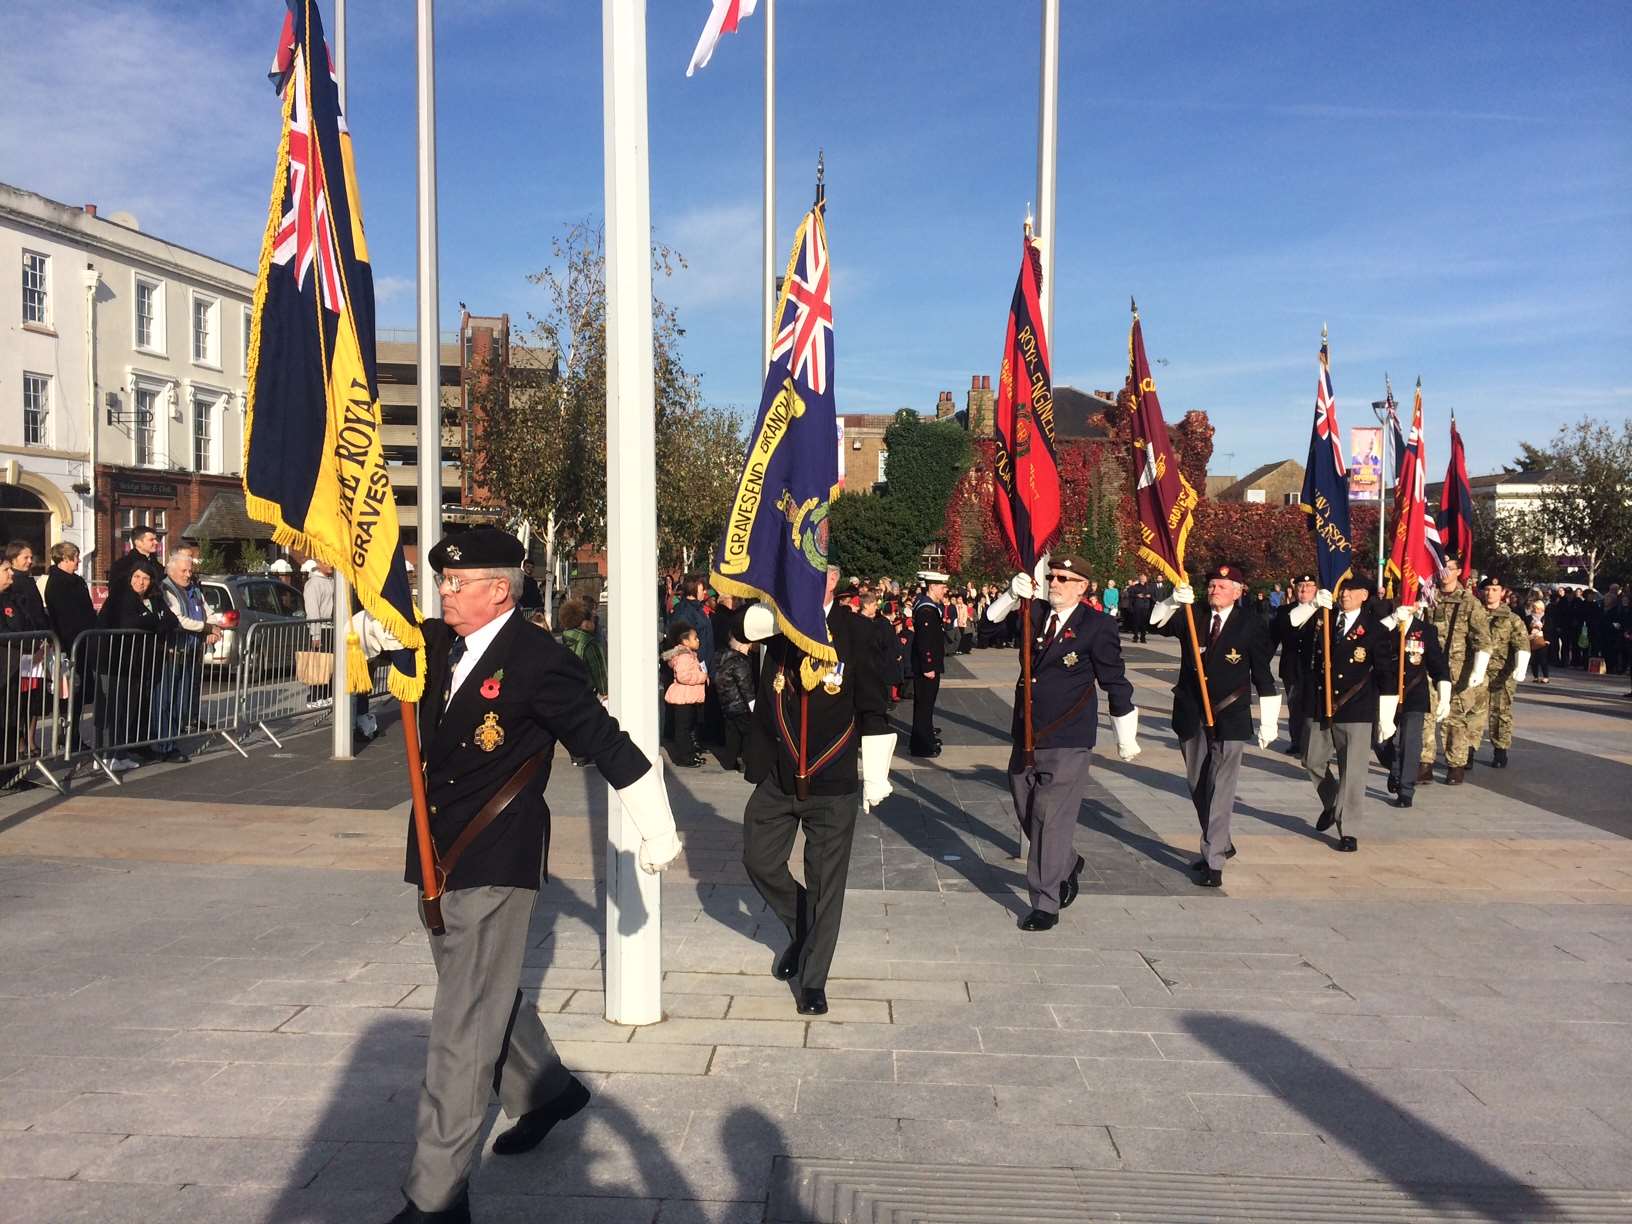 Veterans and cadets carry the Standards during the service in the Community Square